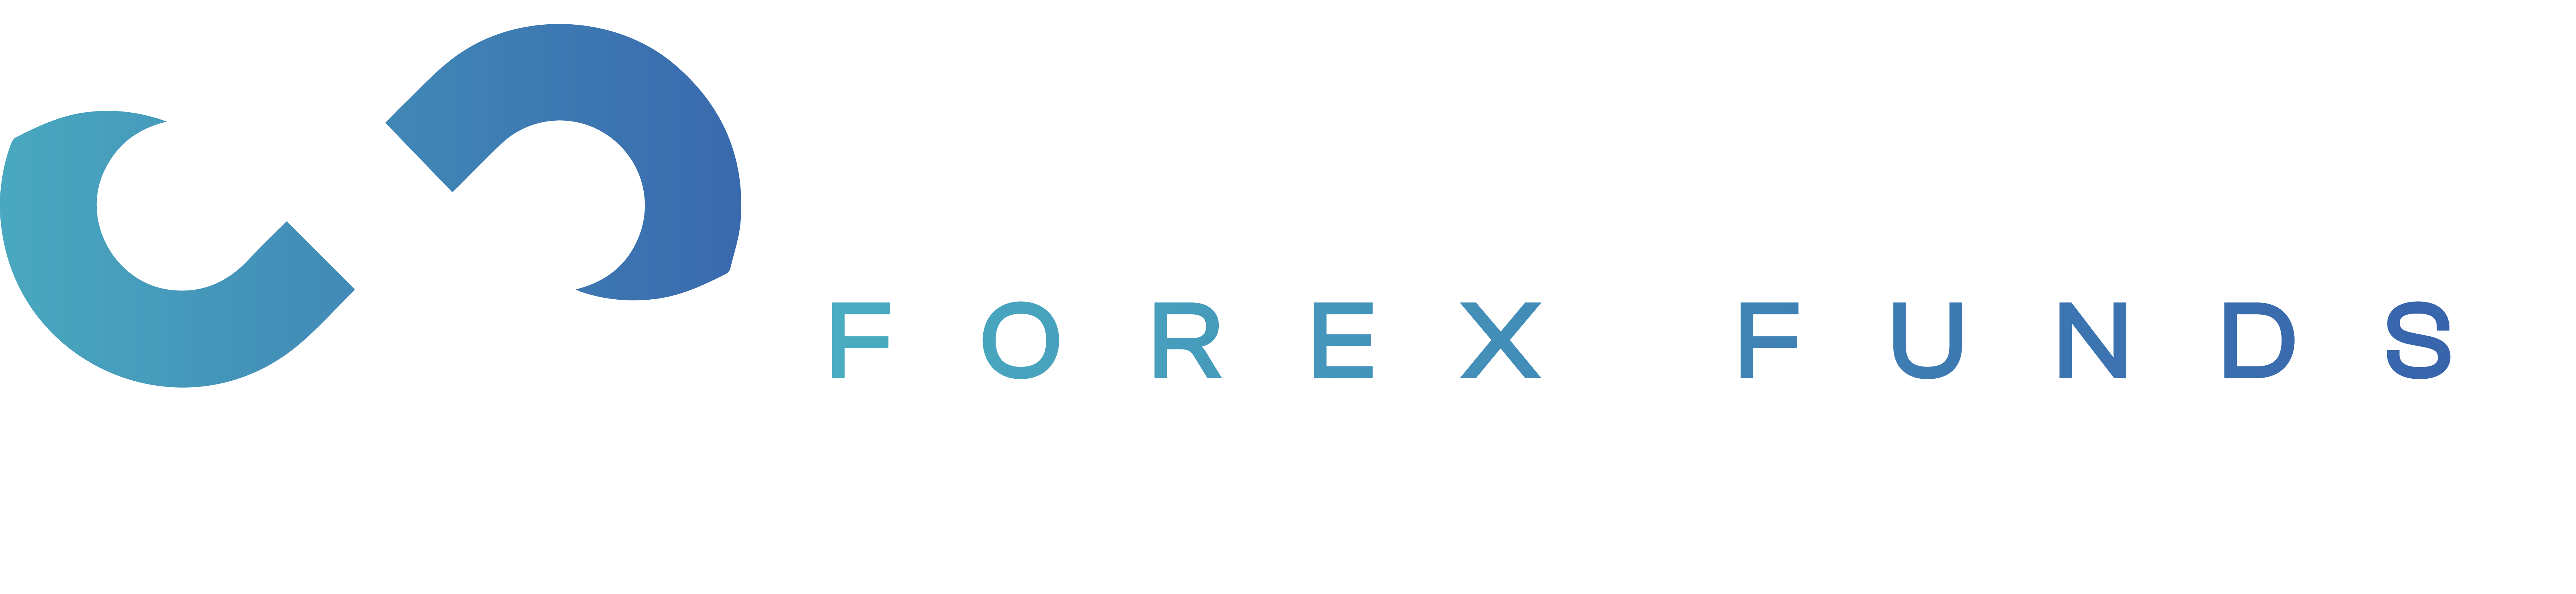 Infinity Forex Funds